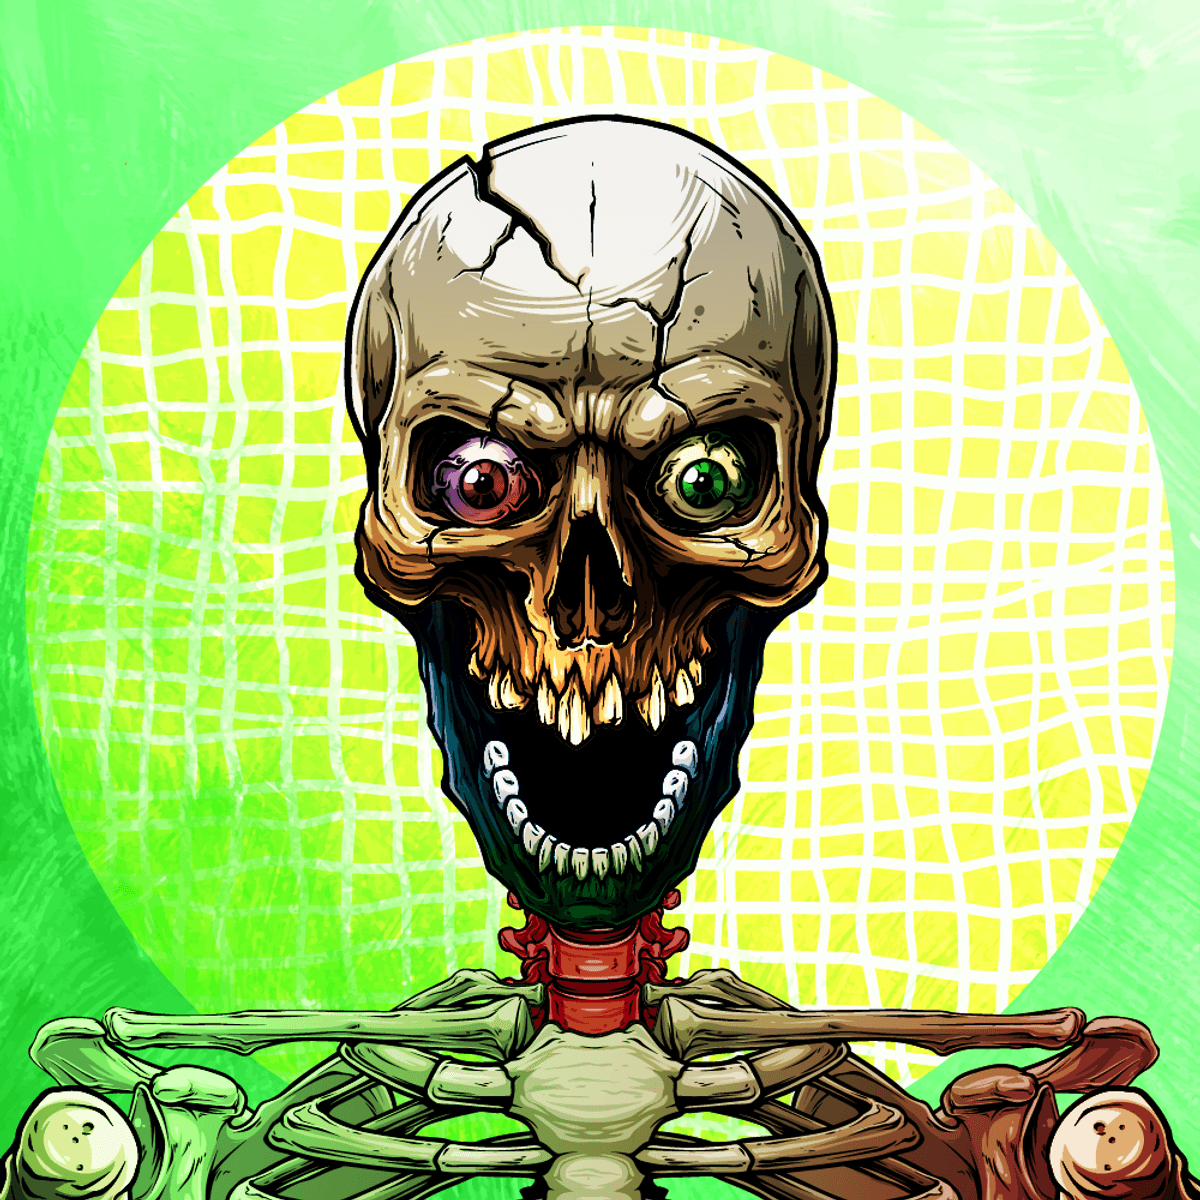 Undead #4159